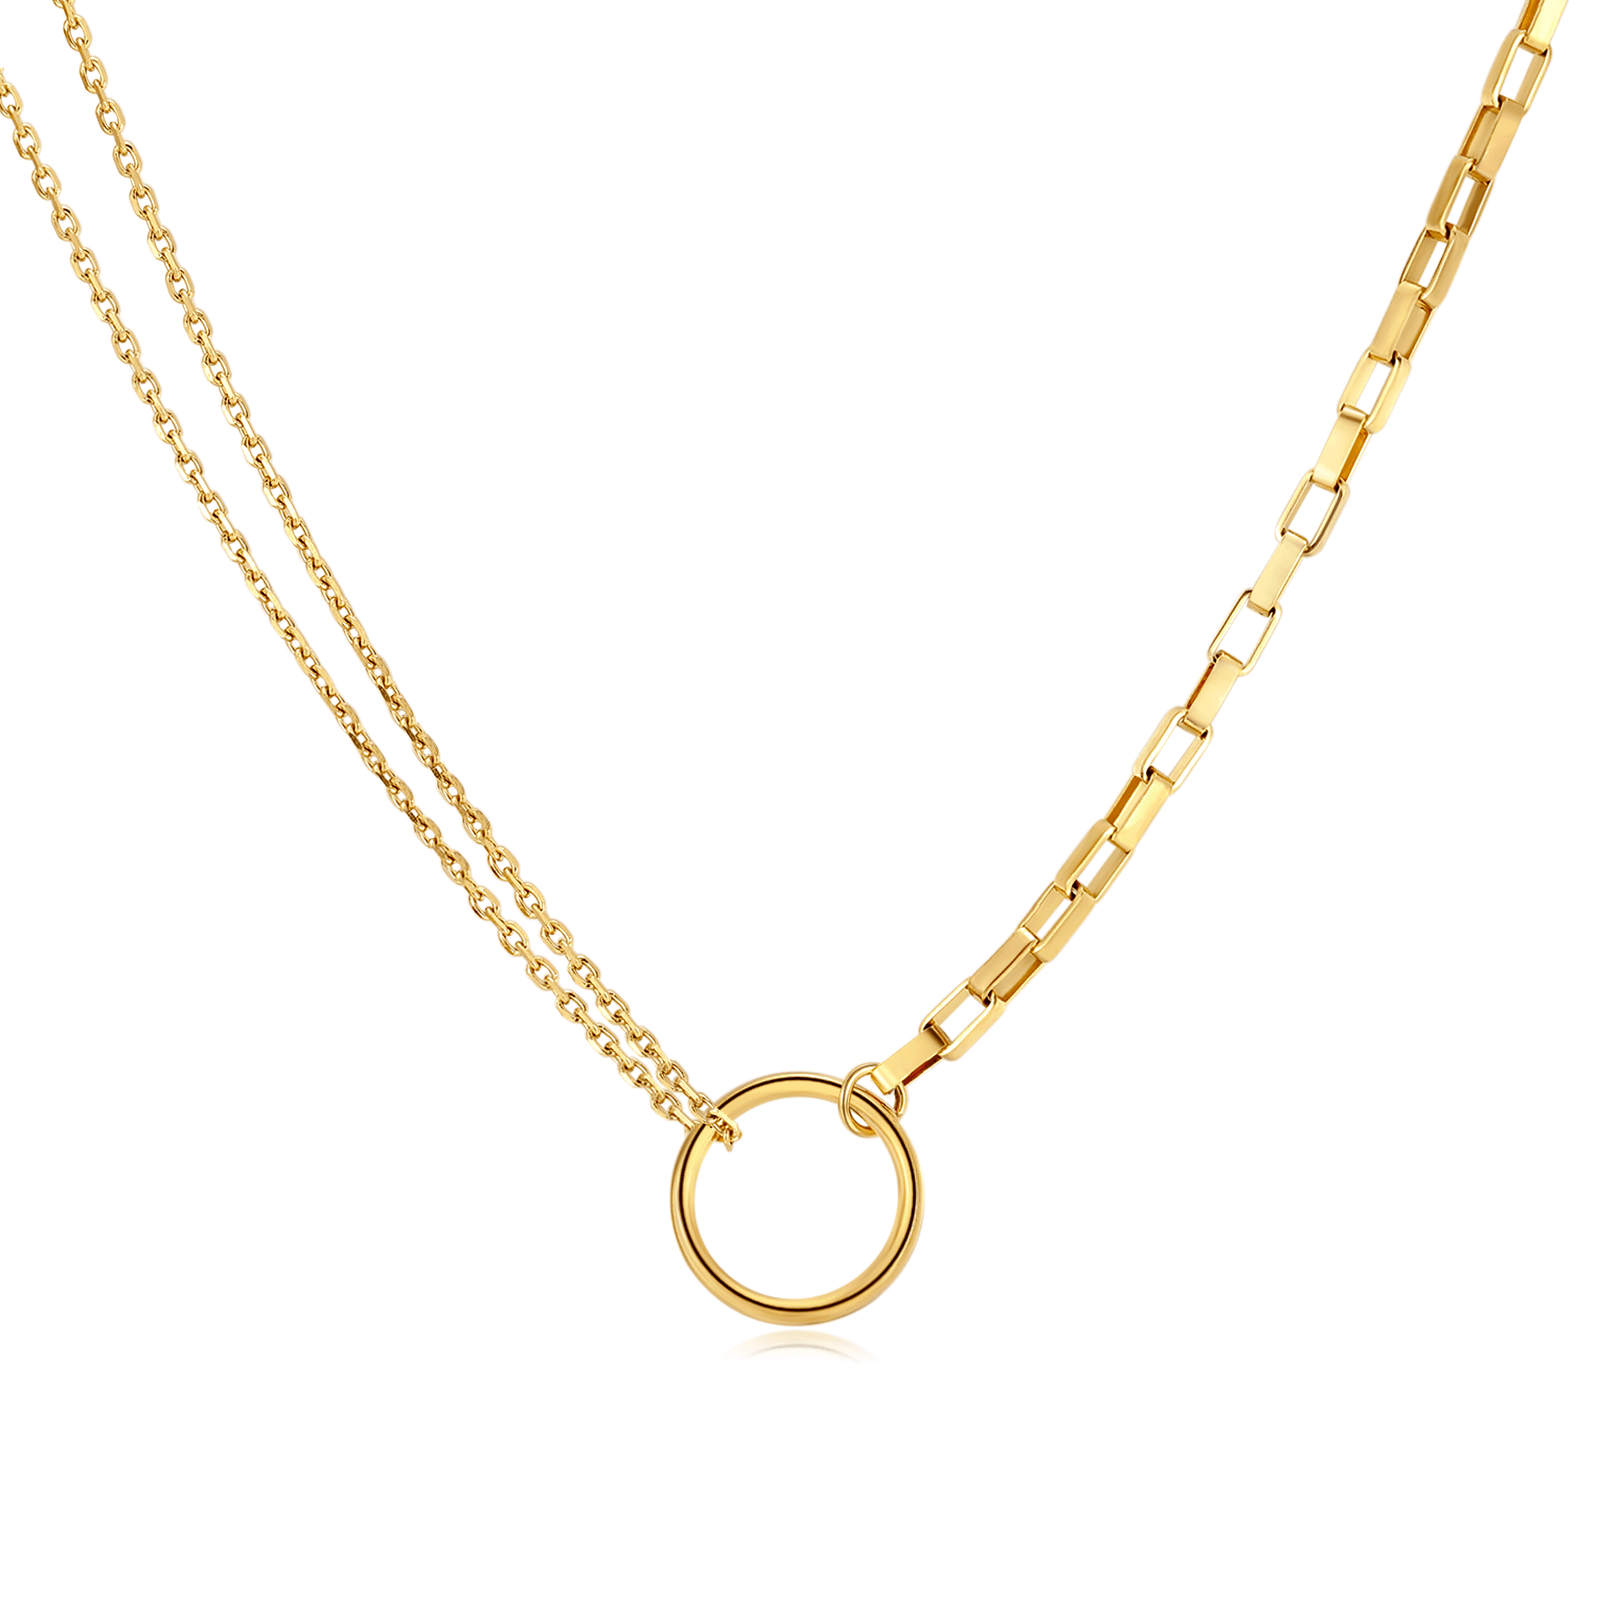 "Circle and Chains" Necklace - SophiaJewels